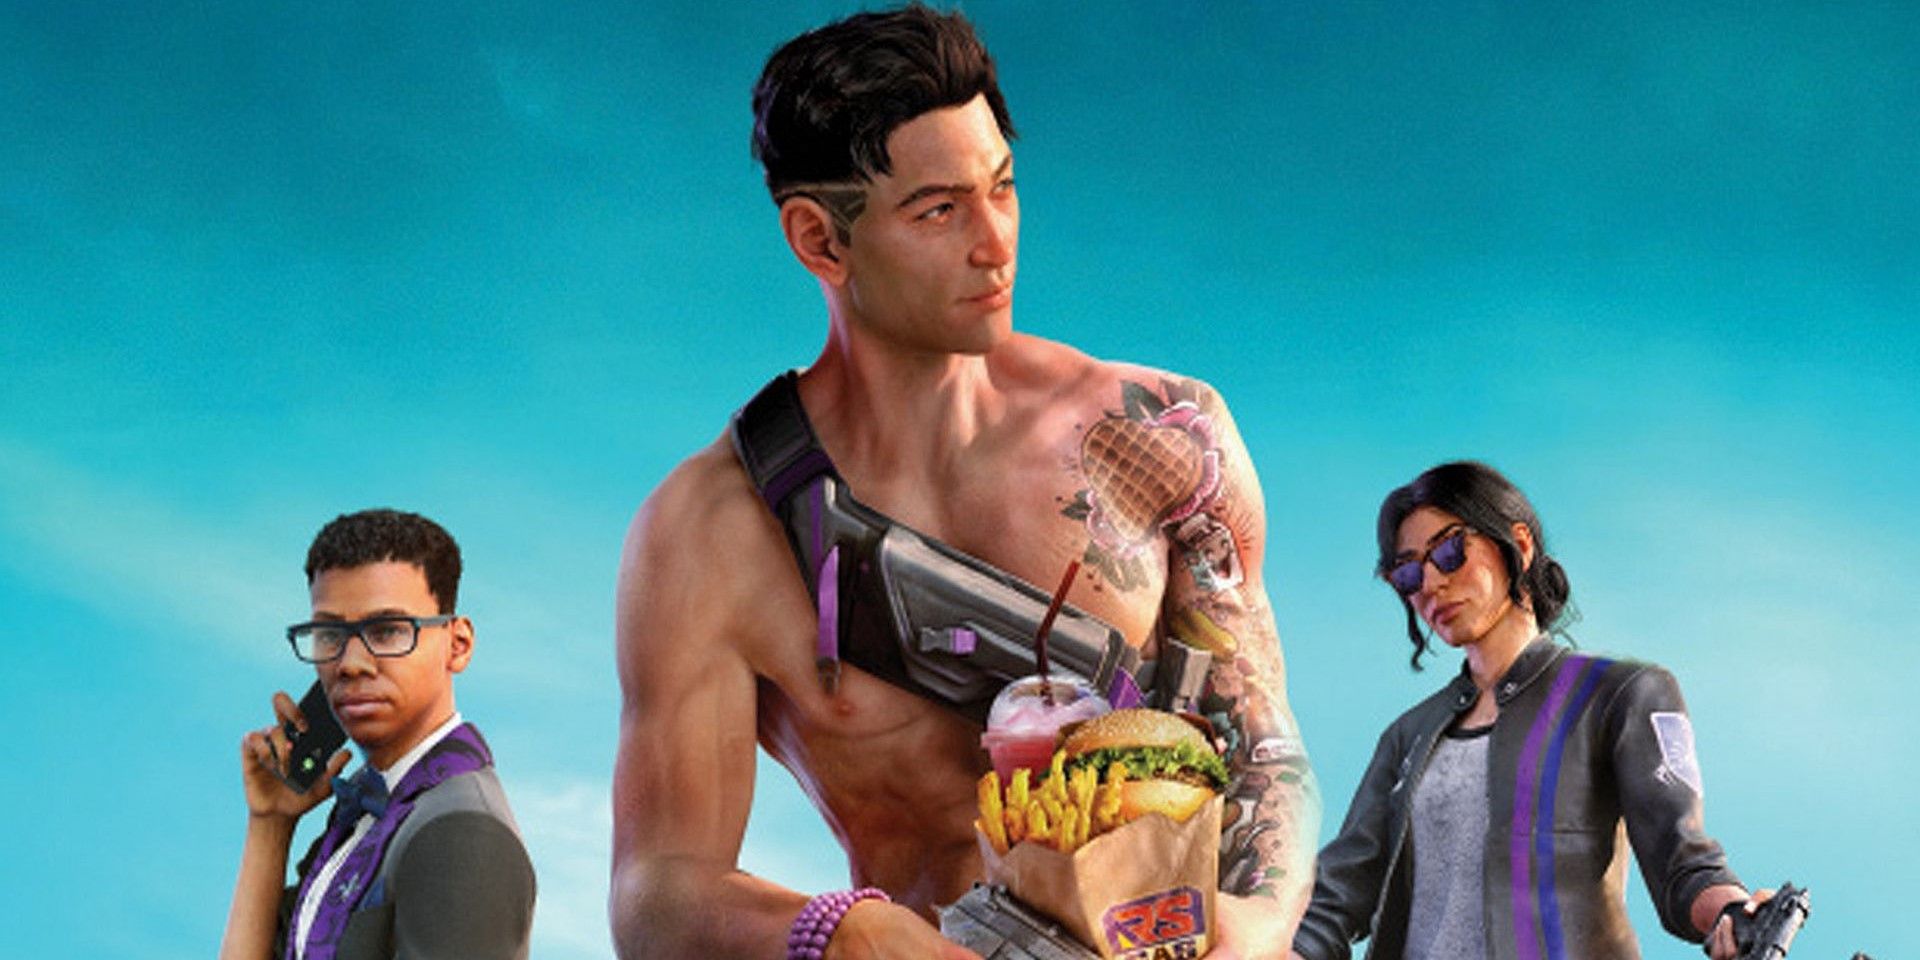 Saints Row (2022): 5 best clothing stores for character customization